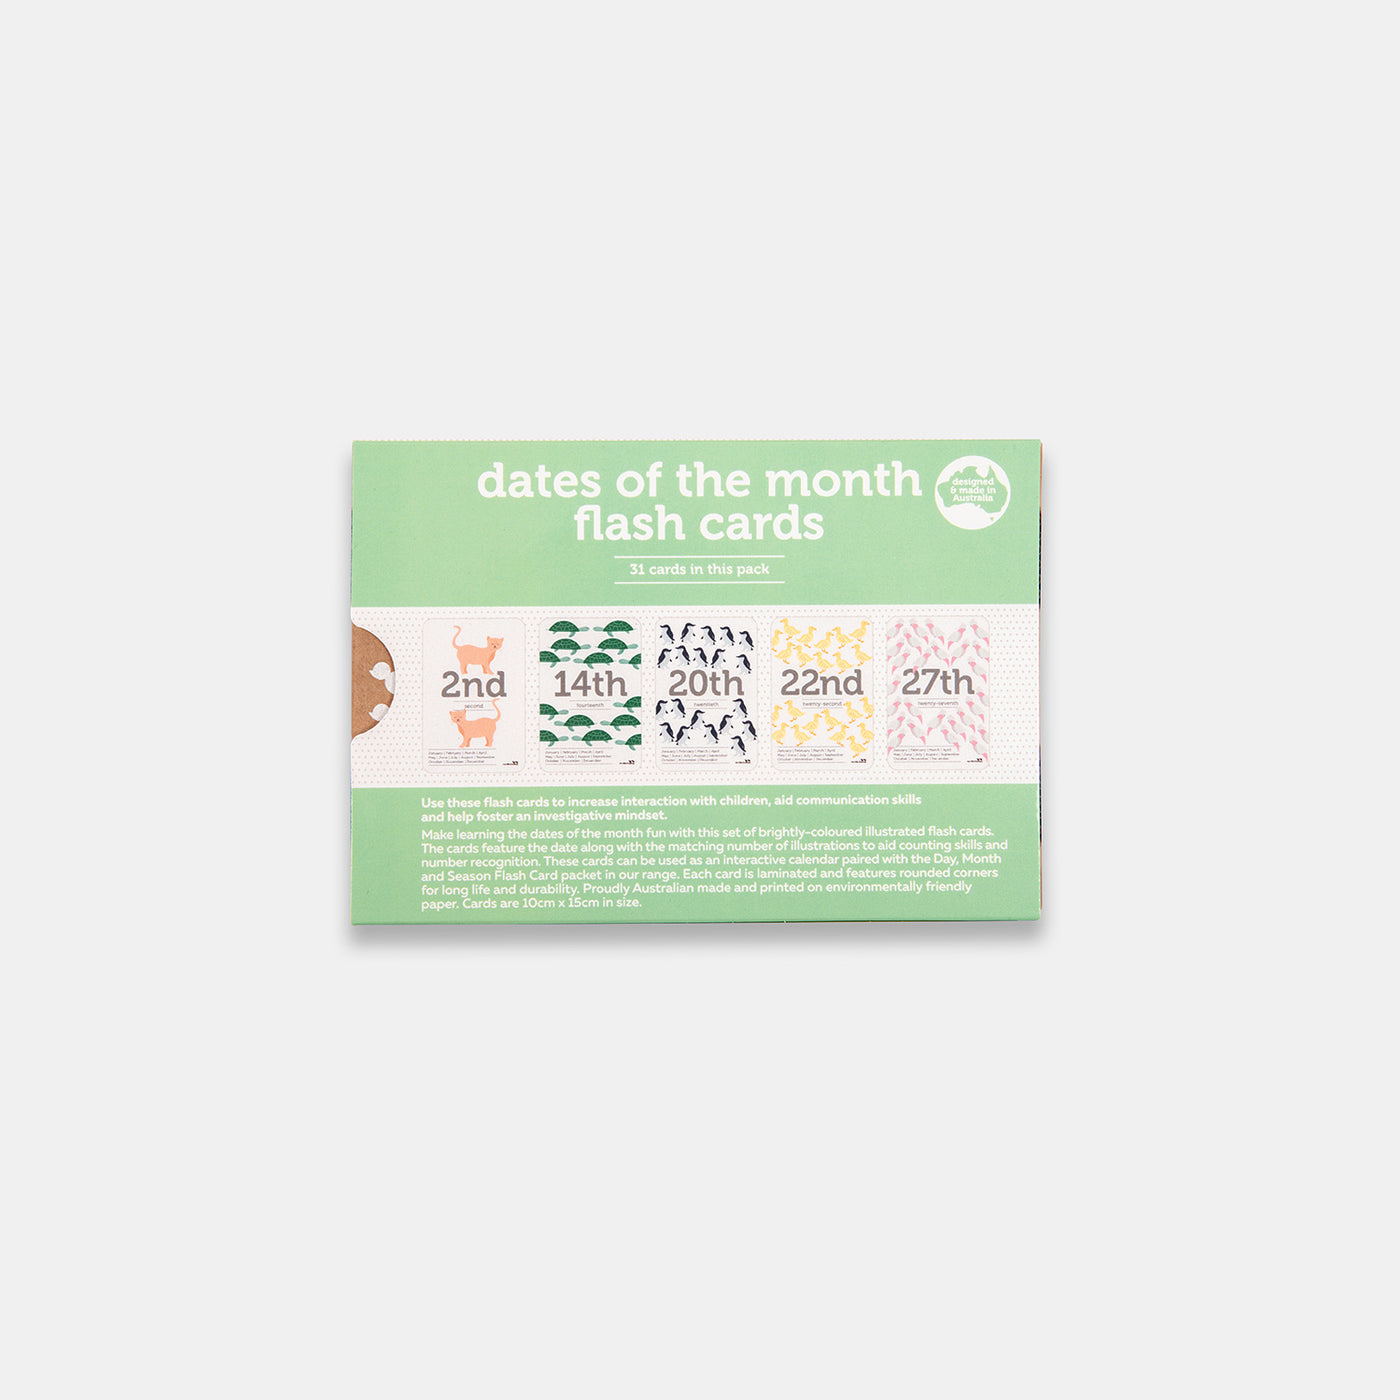 Dates of the Month Flash Cards